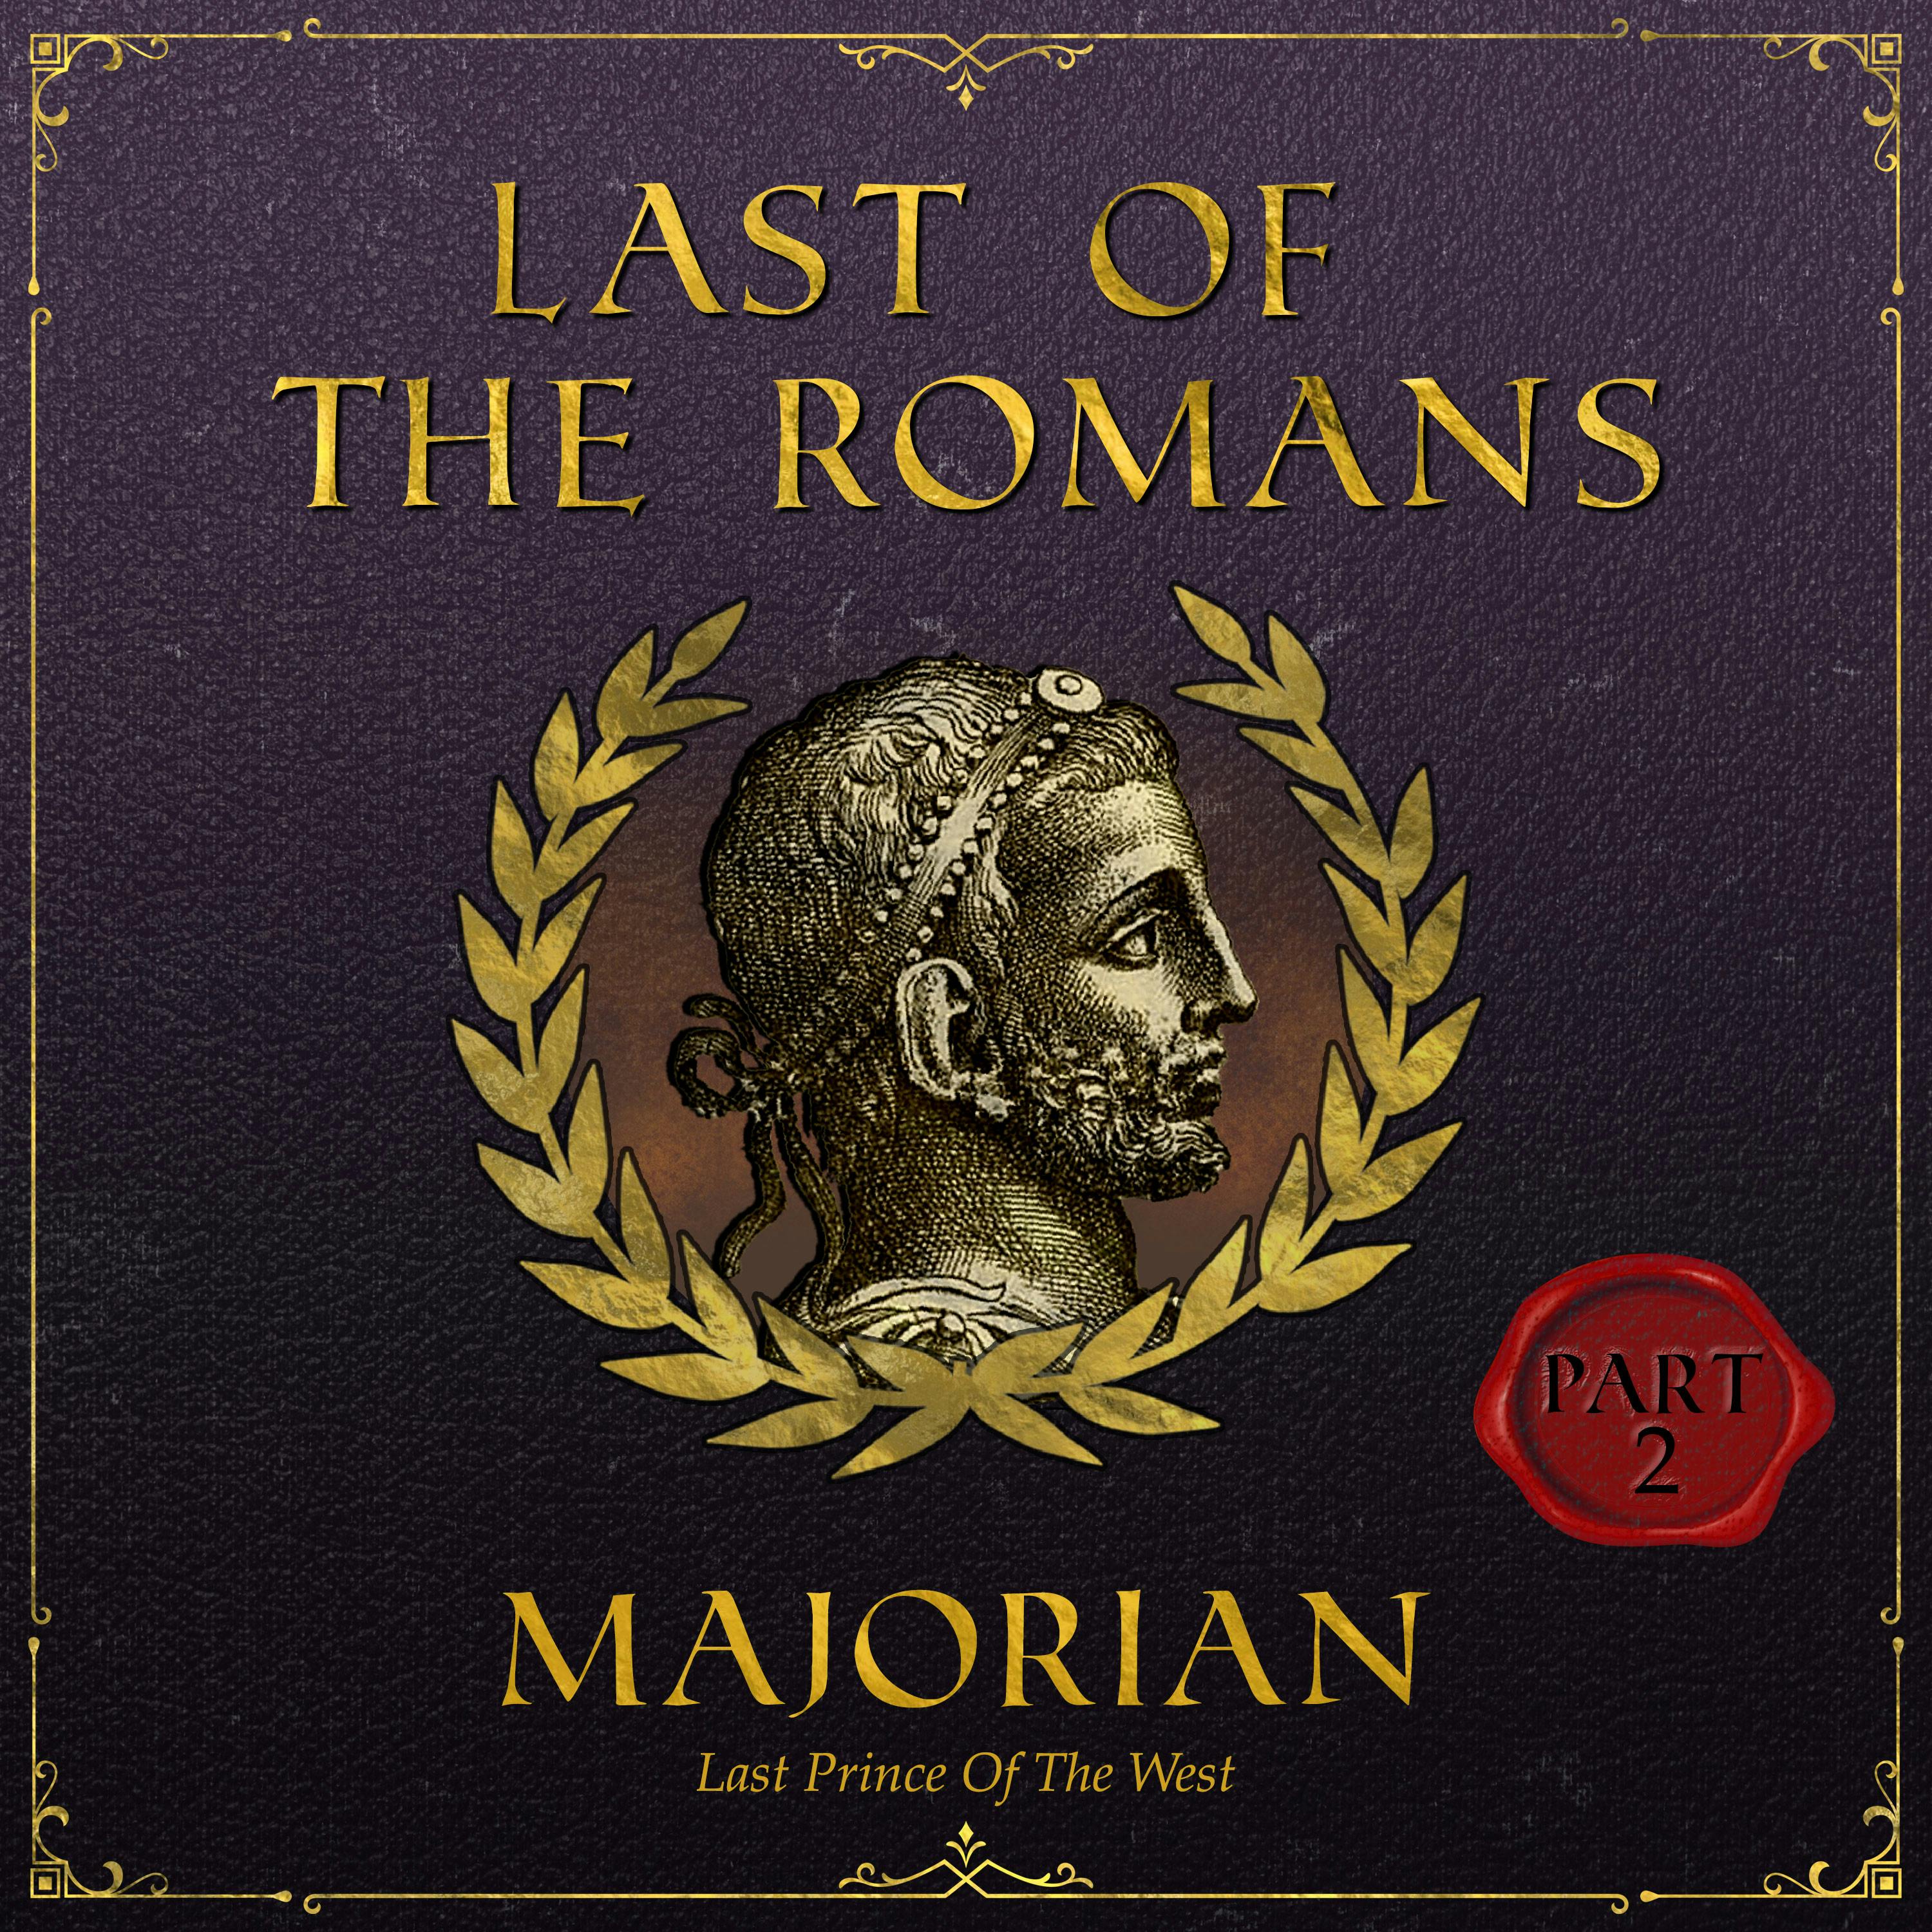 The Rise and Fall of Majorian | Part 2: Downfall of the Roman Empire